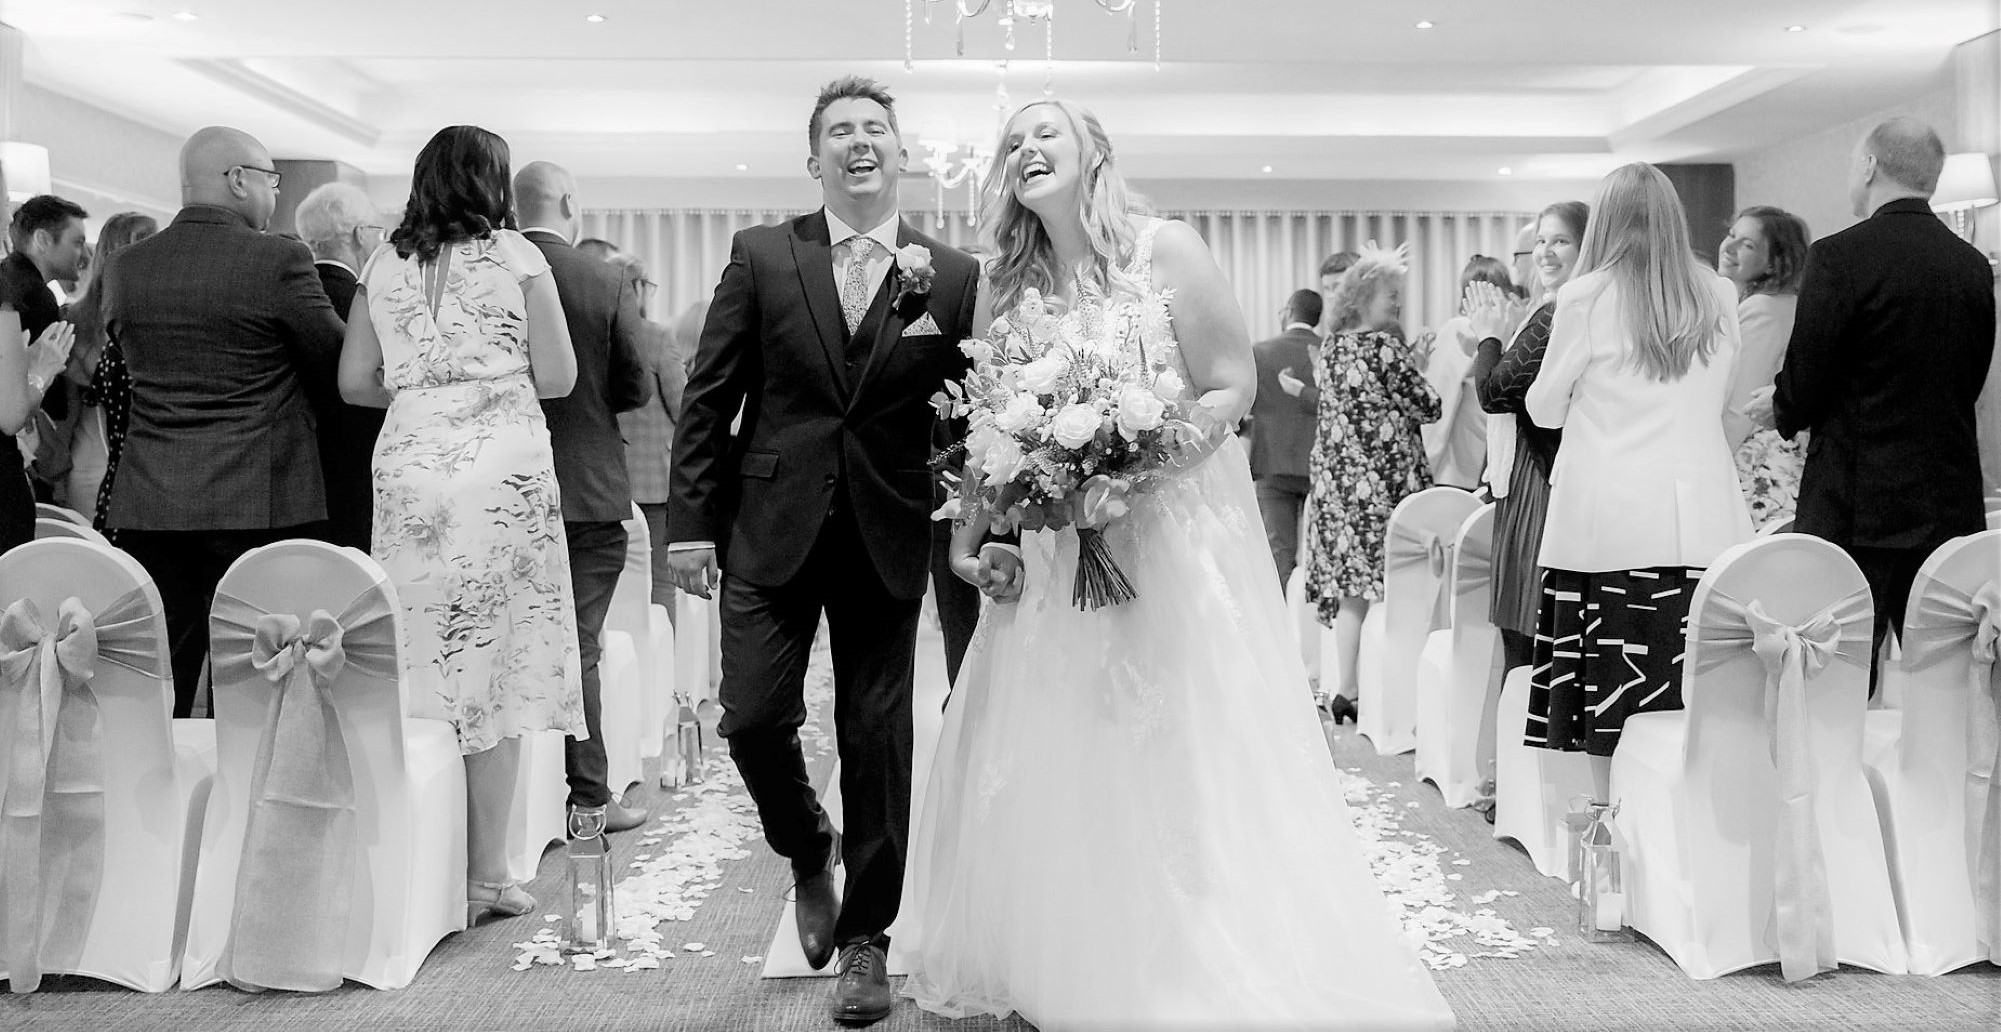 laughing bride grooms aisle walk horsley lodge hotel wedding ceremony derby s r urwin photography oxfordshire